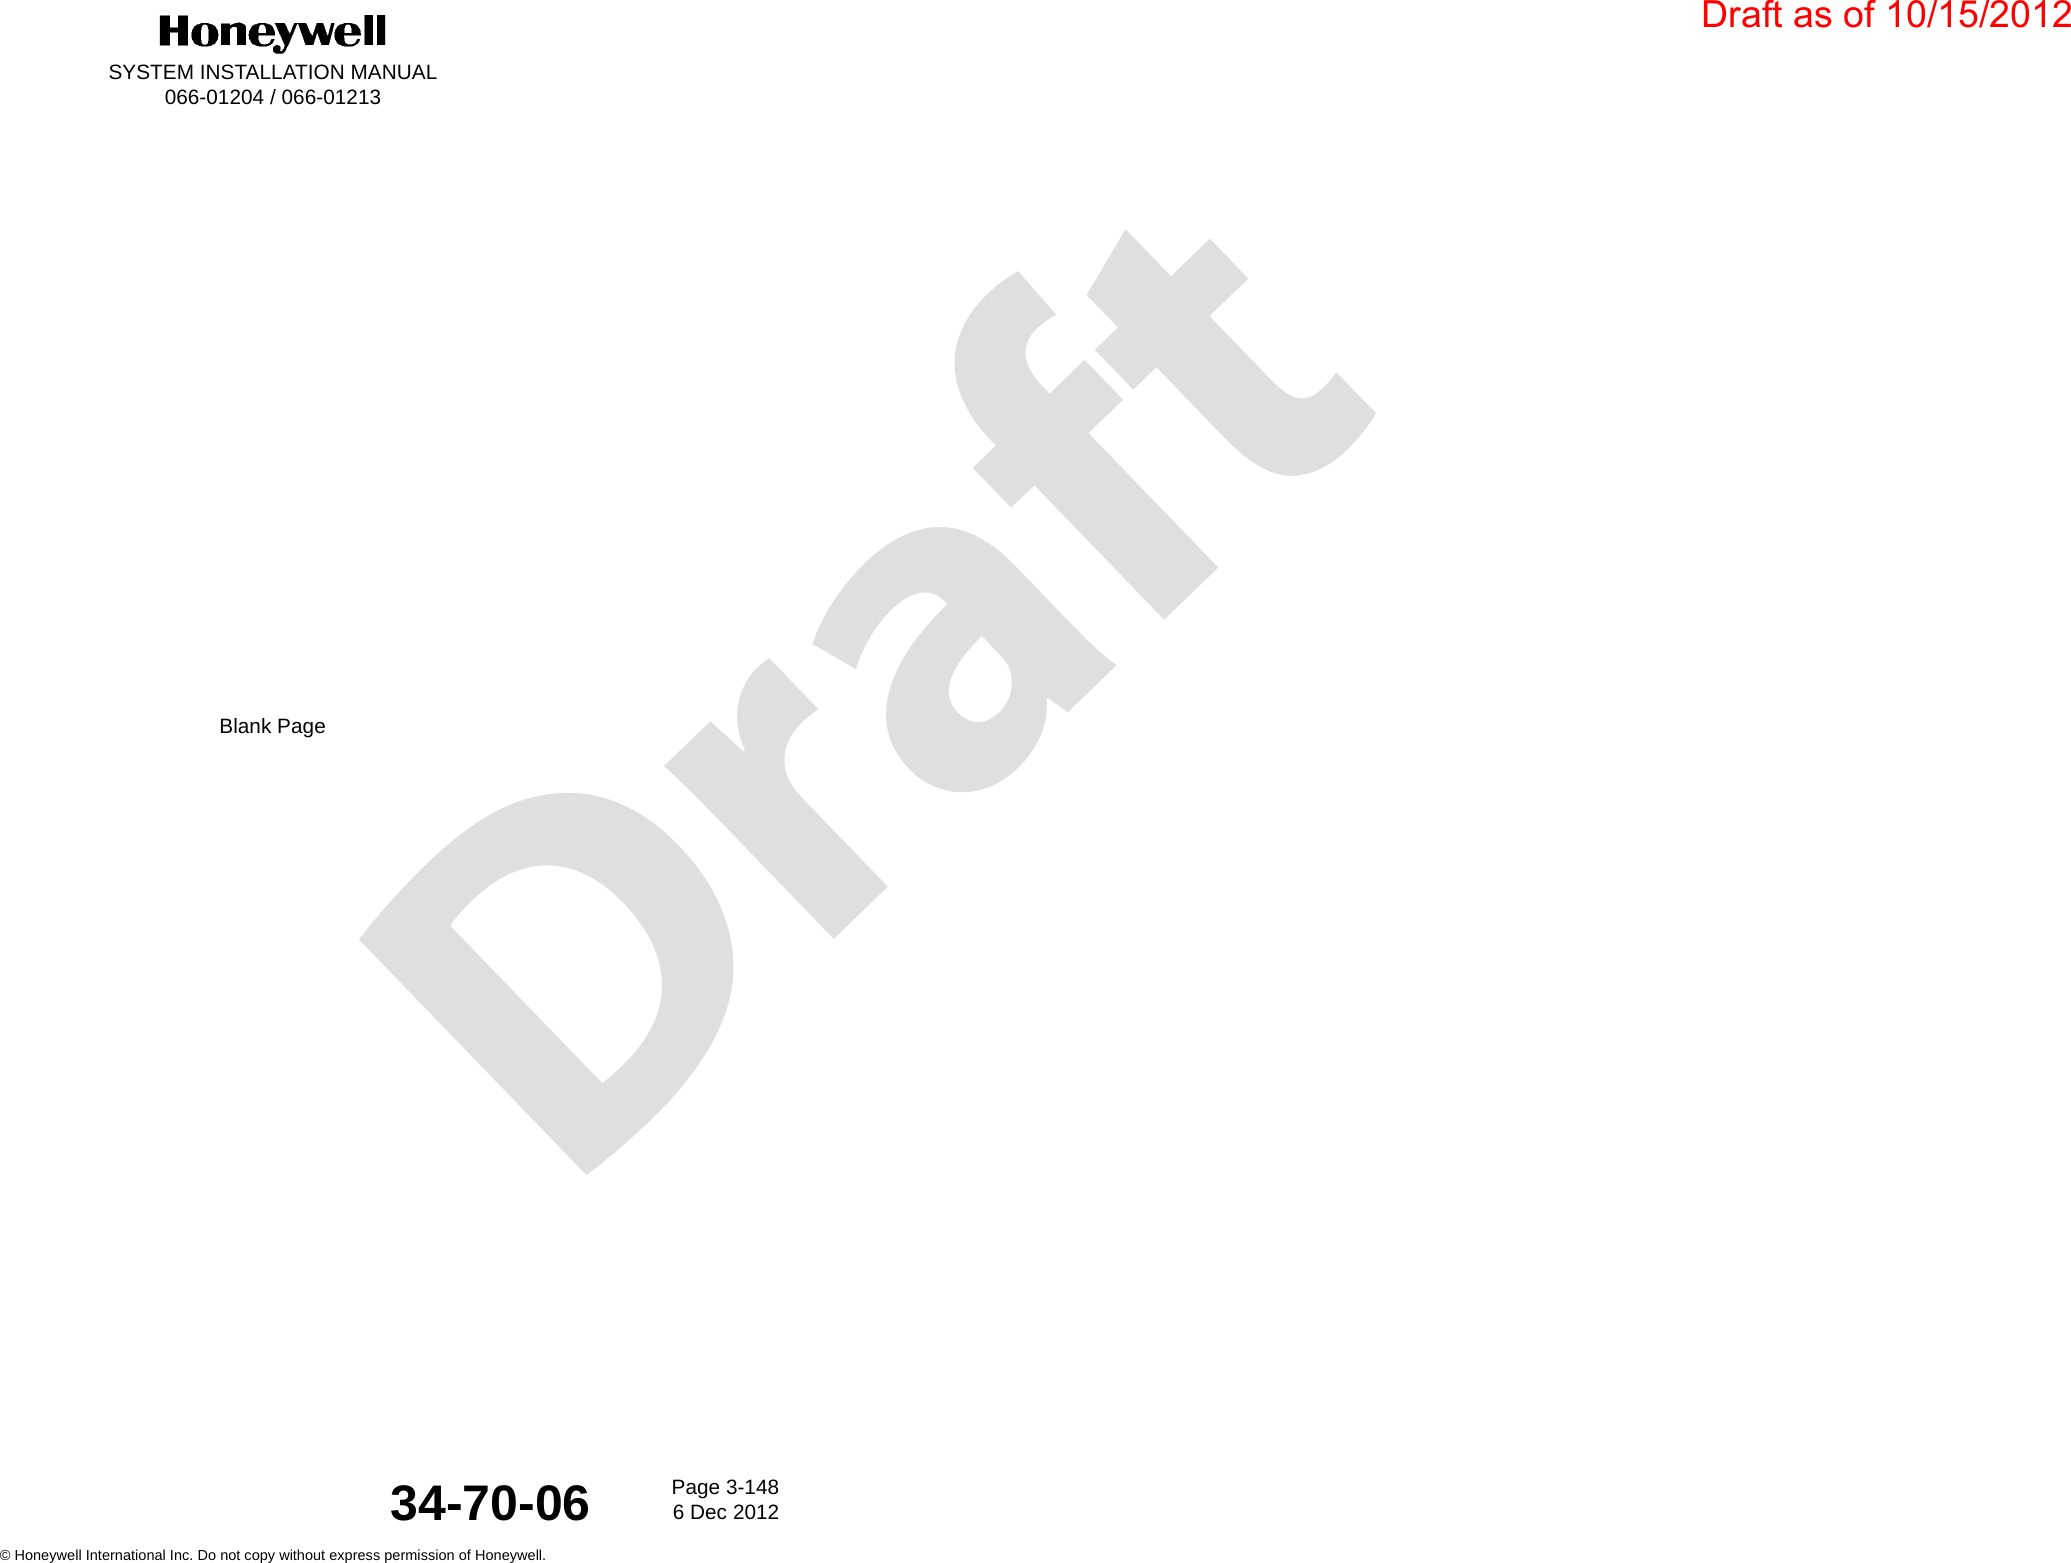 DraftSYSTEM INSTALLATION MANUAL066-01204 / 066-01213Page 3-1486 Dec 2012© Honeywell International Inc. Do not copy without express permission of Honeywell.34-70-06Blank PageDraft as of 10/15/2012